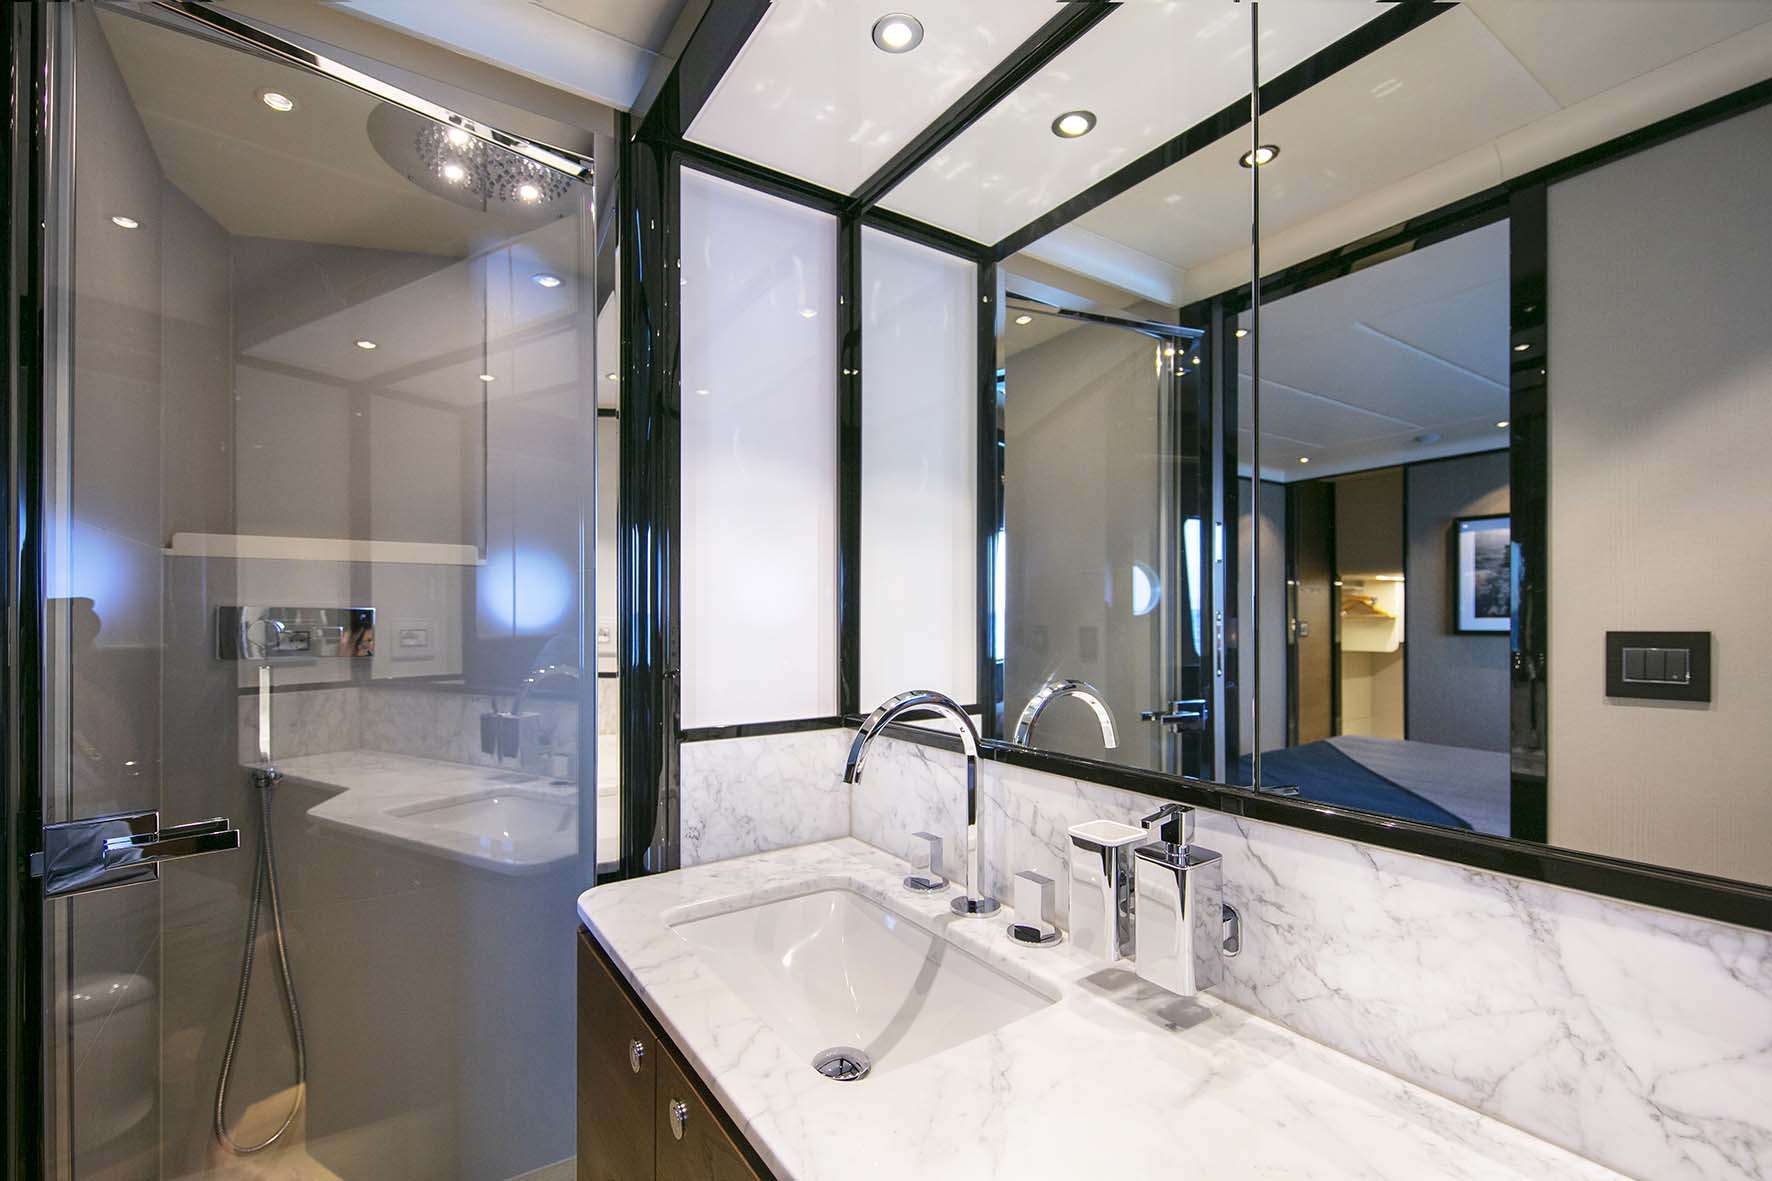 Charter Enigma in Italy, Sardina, Corsica & French a luxury modern yacht bathroom - High Point Yachting